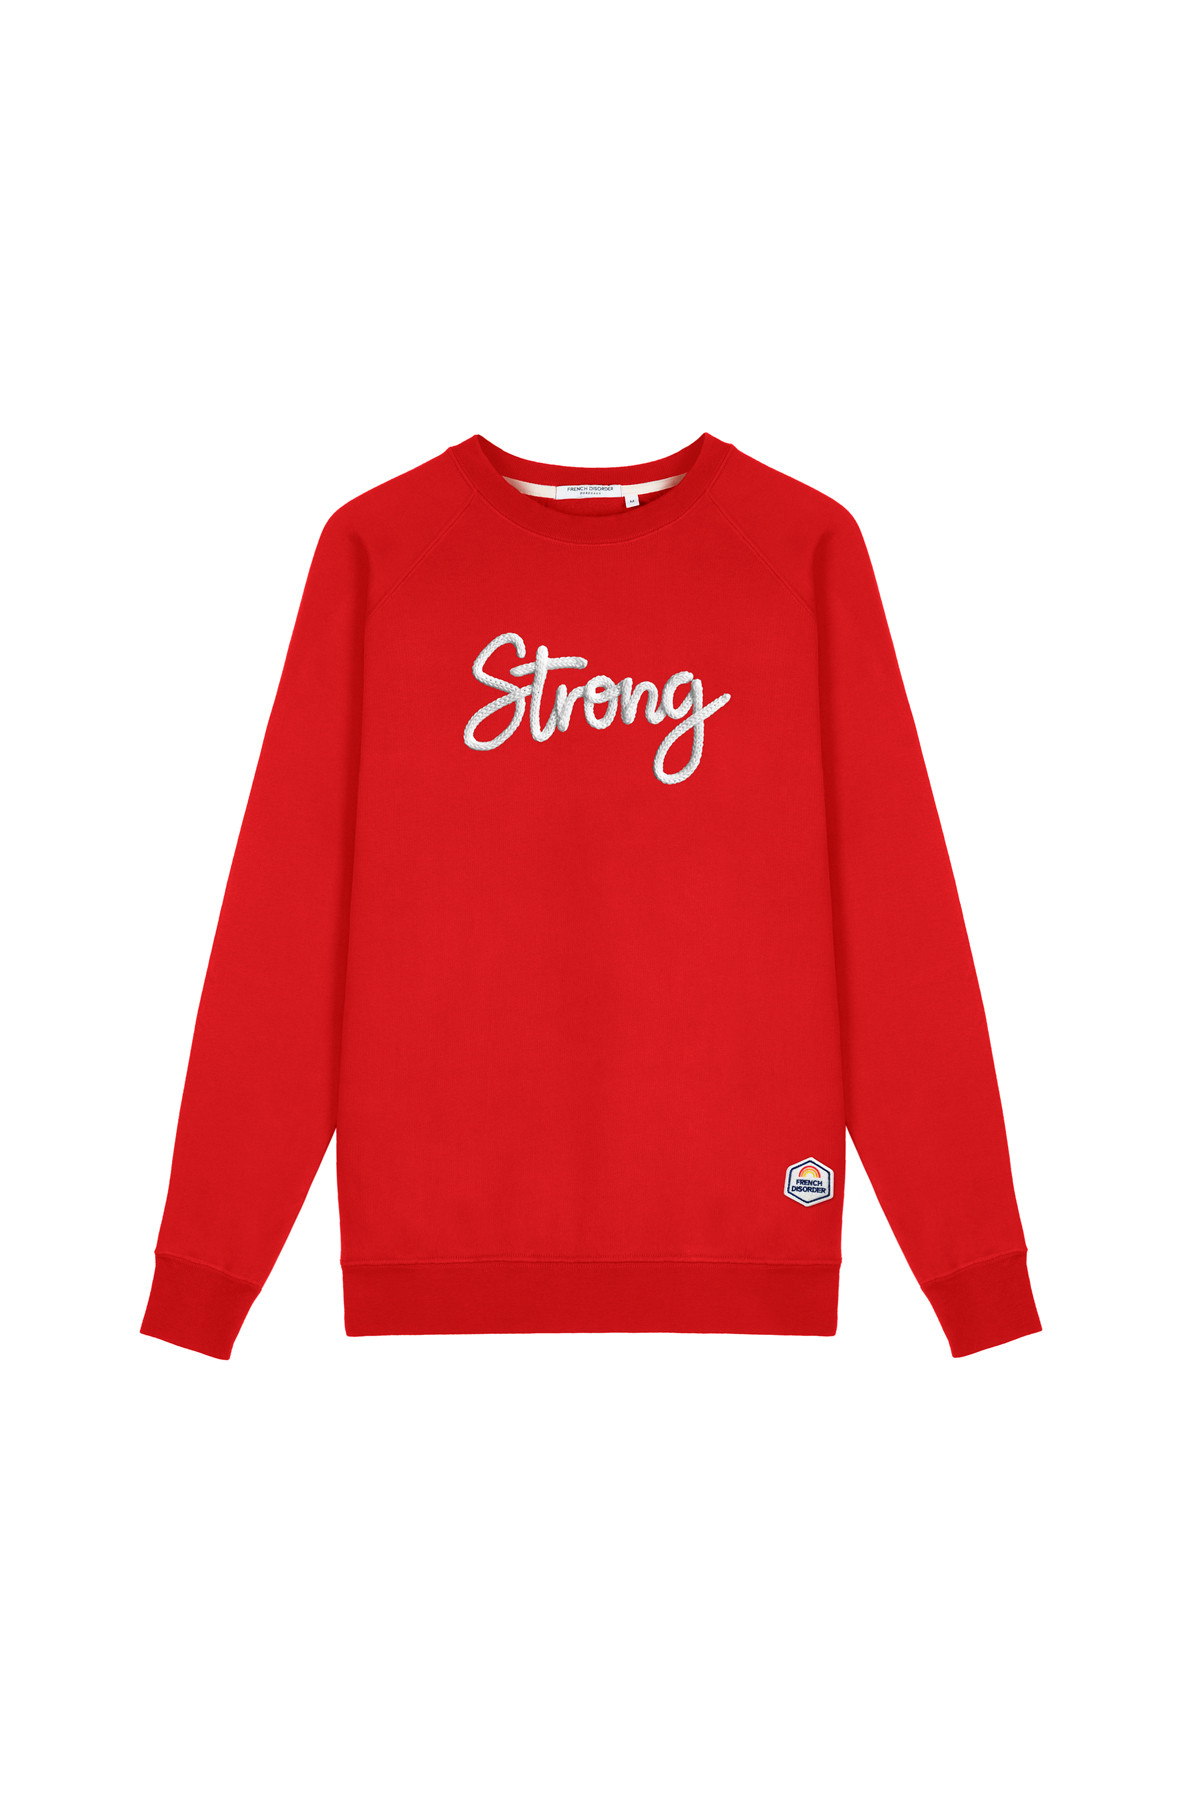 Photo de SWEATS Sweat STRONG tricotin chez French Disorder